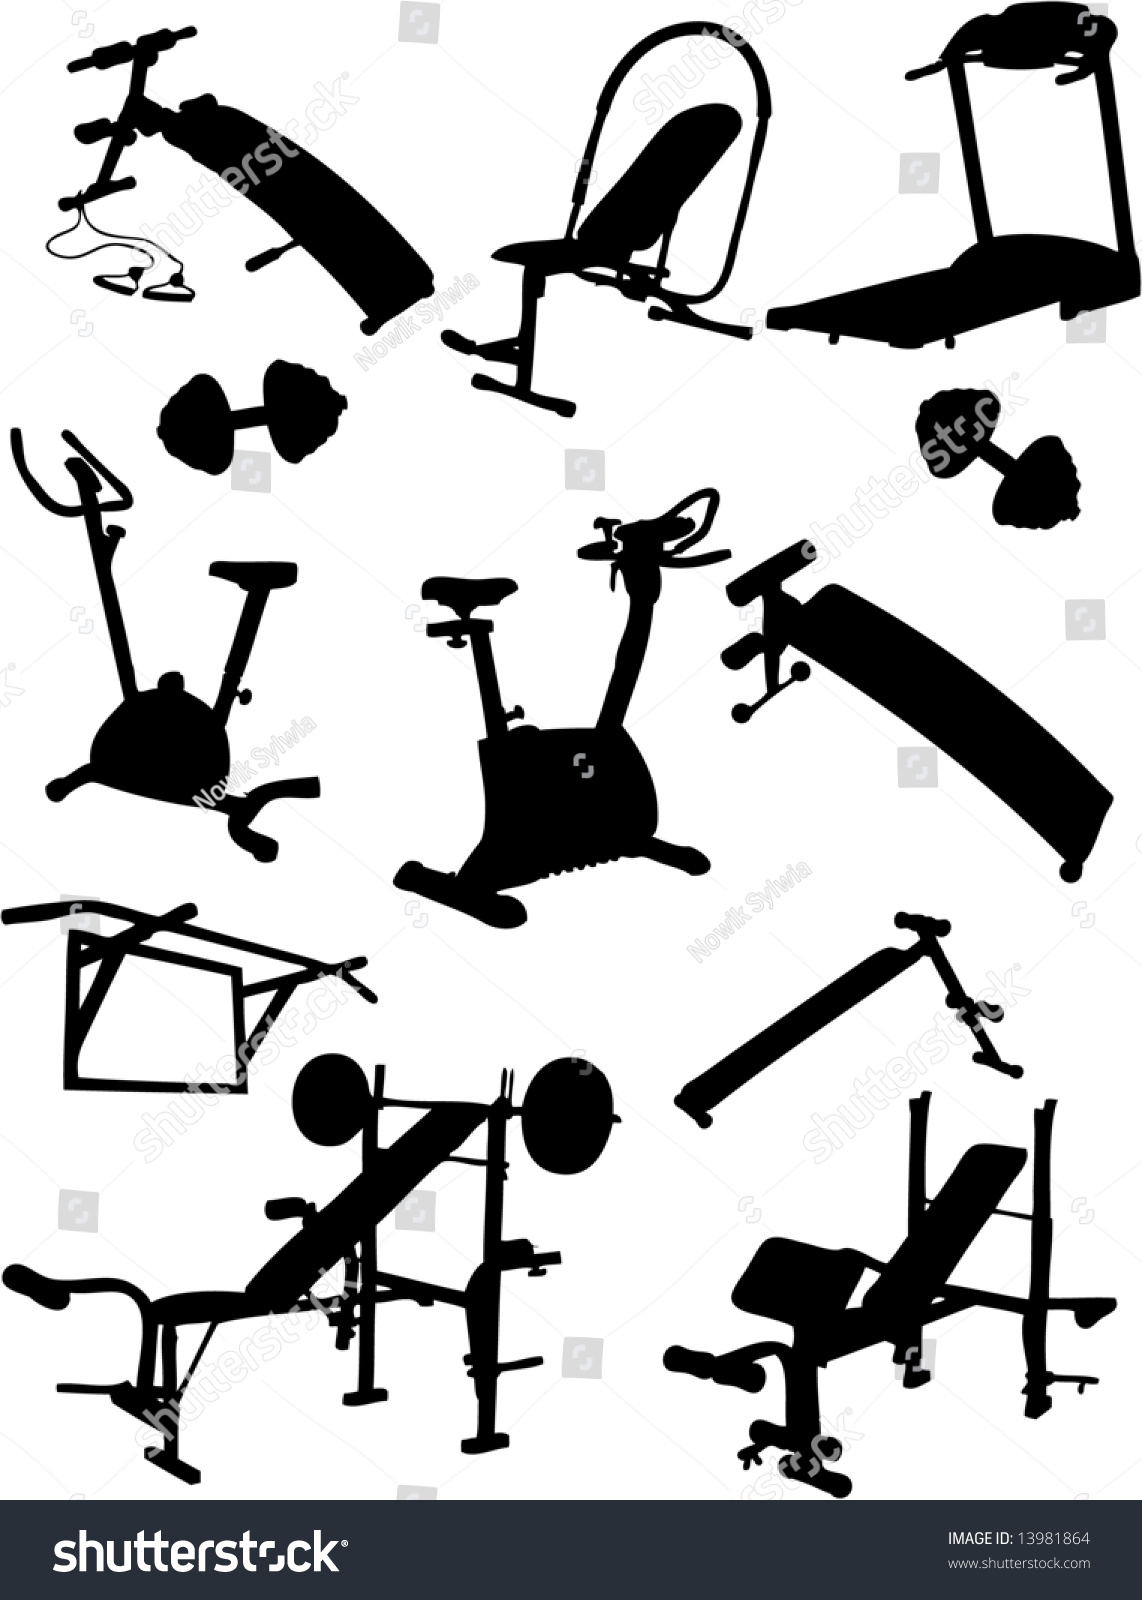 Fitness Vector Icons - 13981864 : Shutterstock